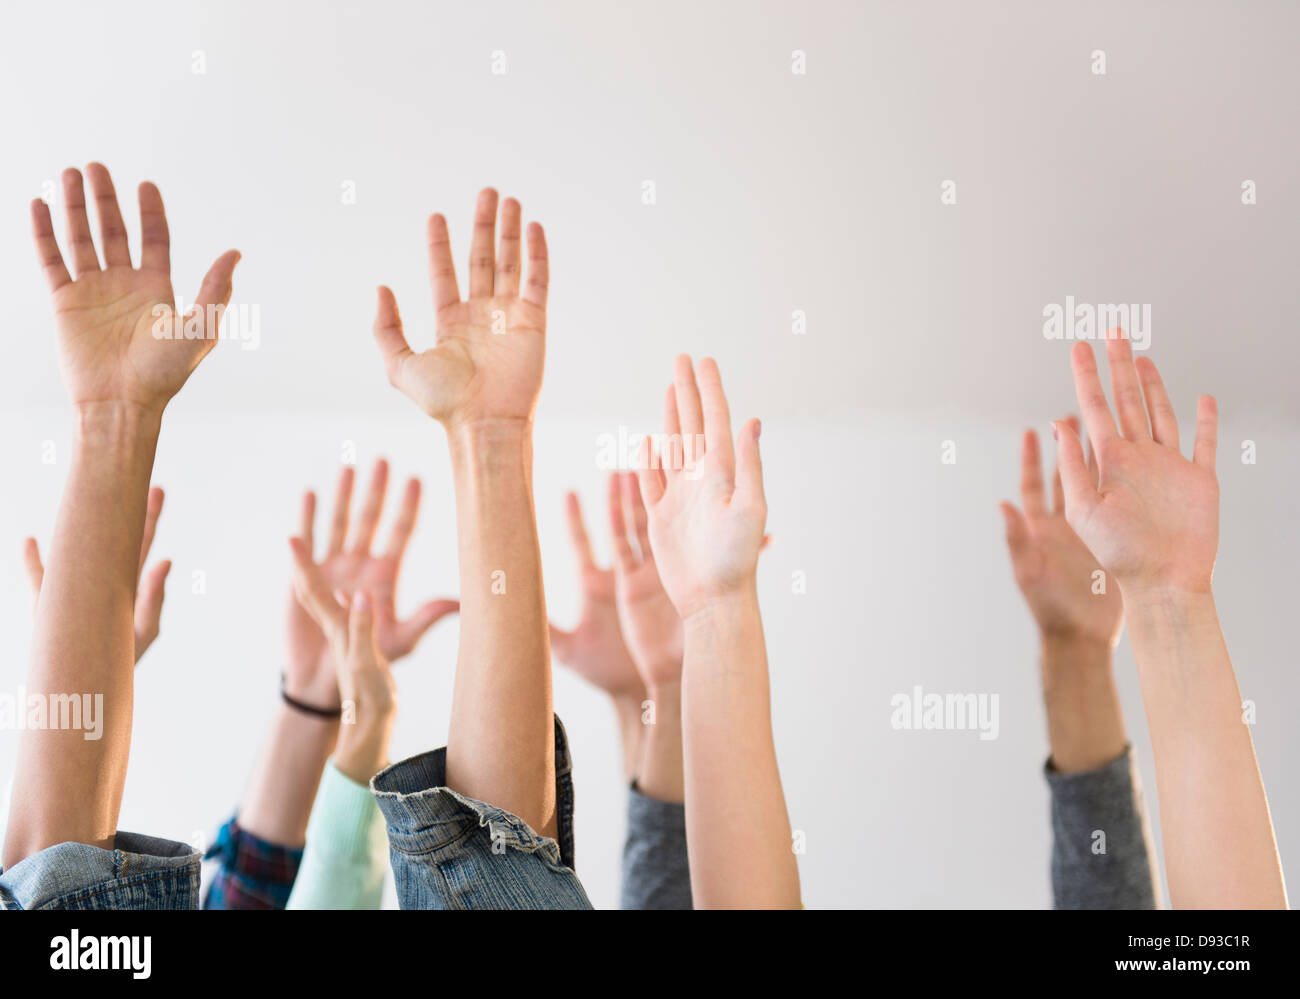 People's hands raised in air Banque D'Images